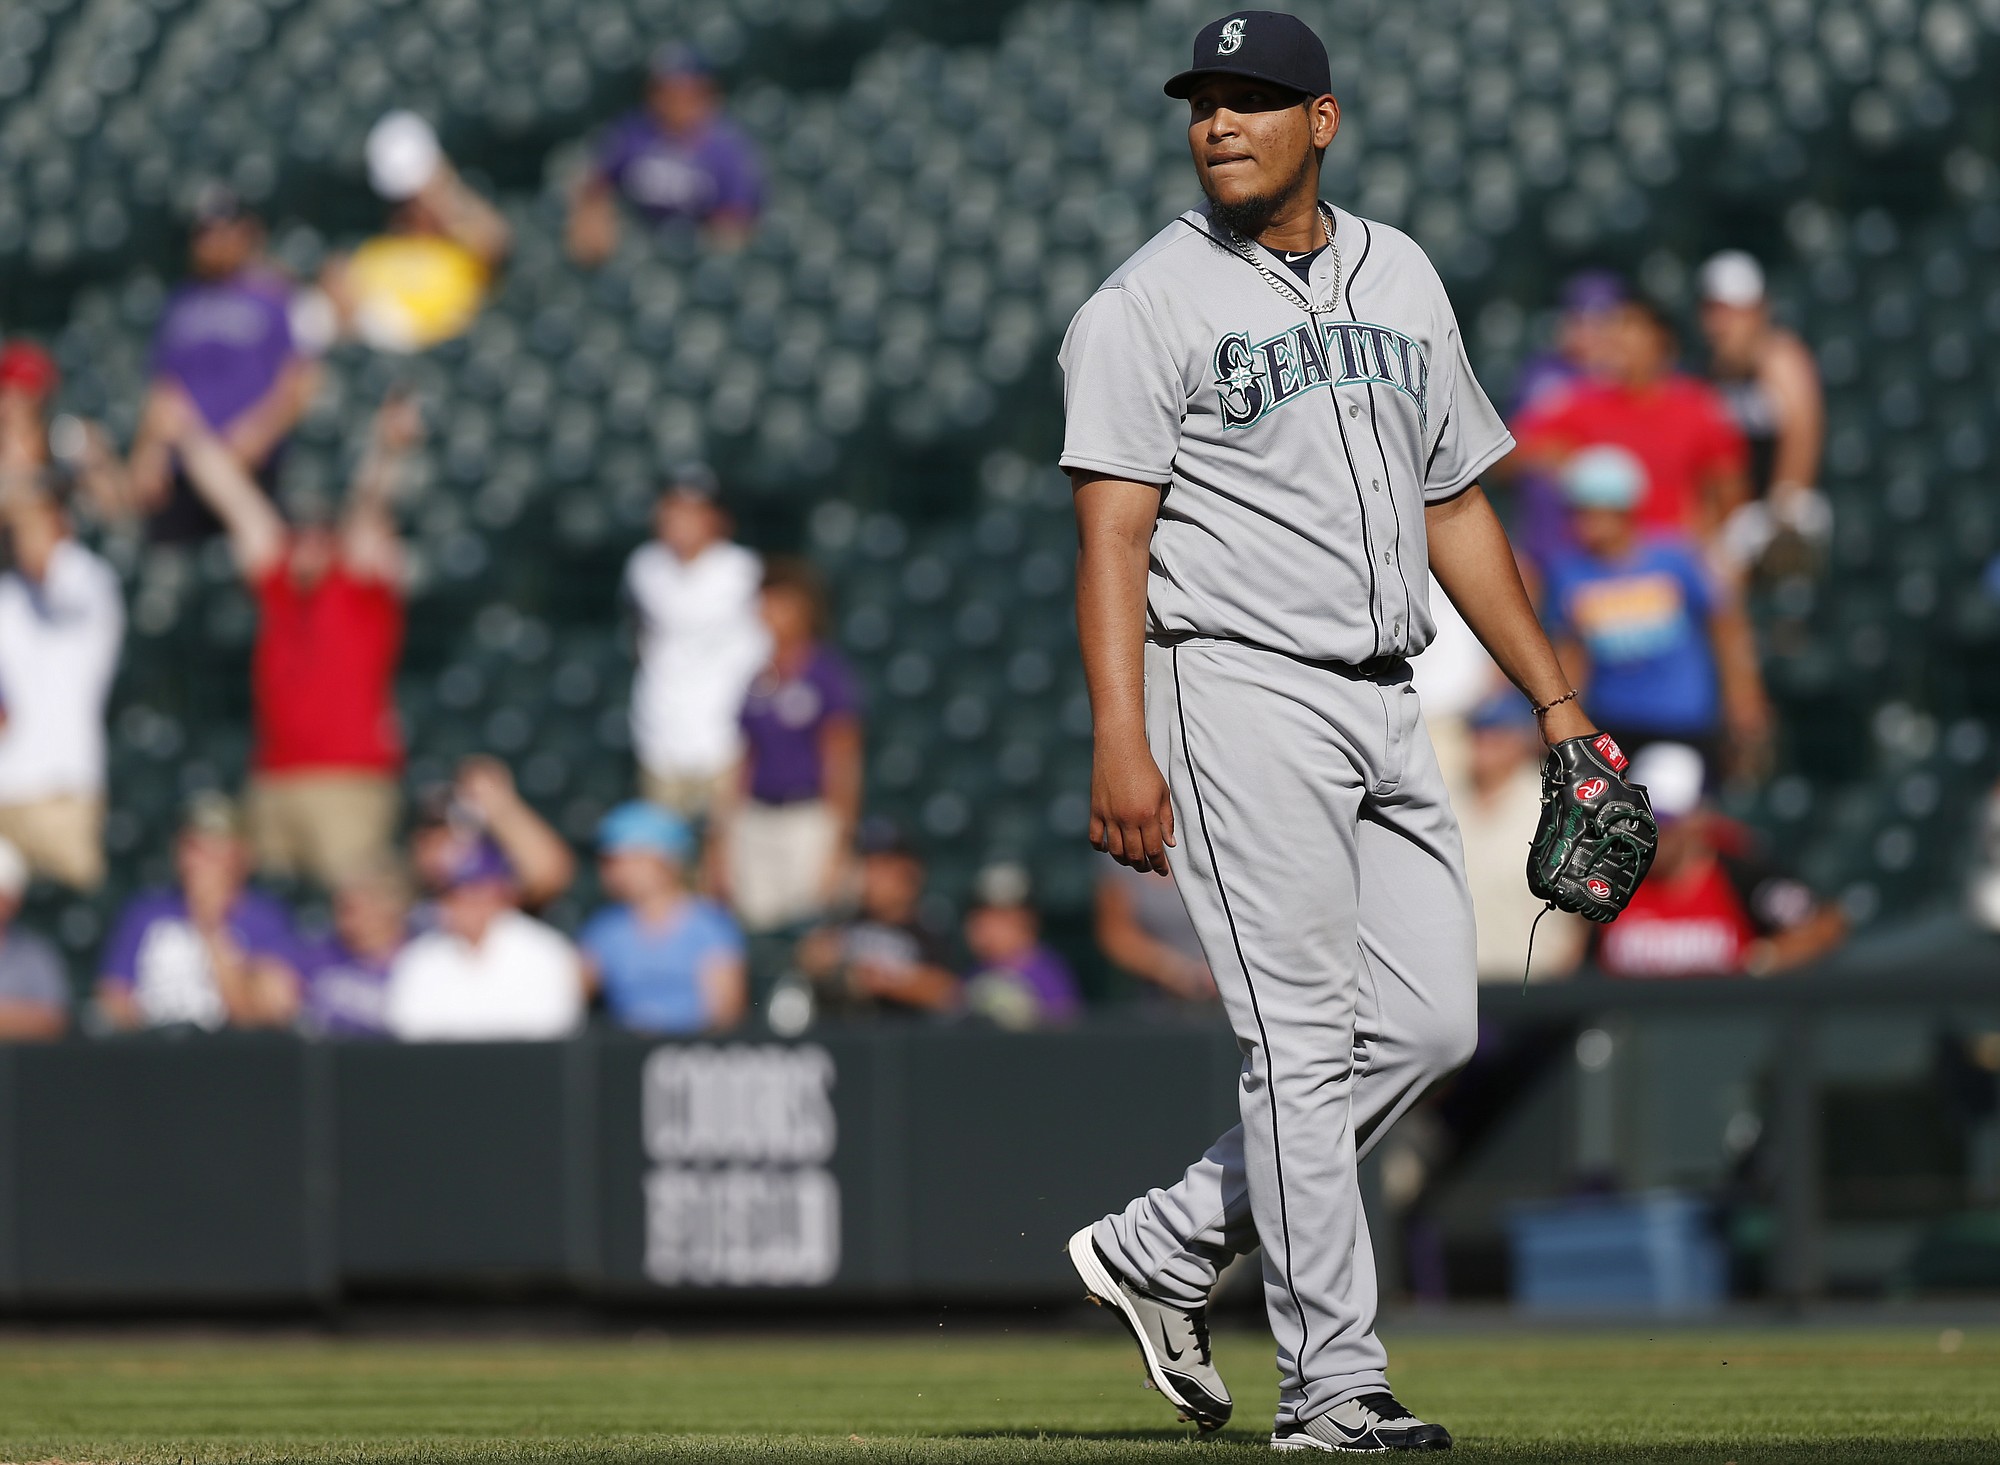 Seattle Mariners relief pitcher Mayckol Guaipe watches a two-run home run that he gave up to Colorado Rockies' Michael McKenry during the 11th inning of a baseball game Wednesday, Aug. 5, 2015, in Denver. Colorado won 7-5 in 11 innings.